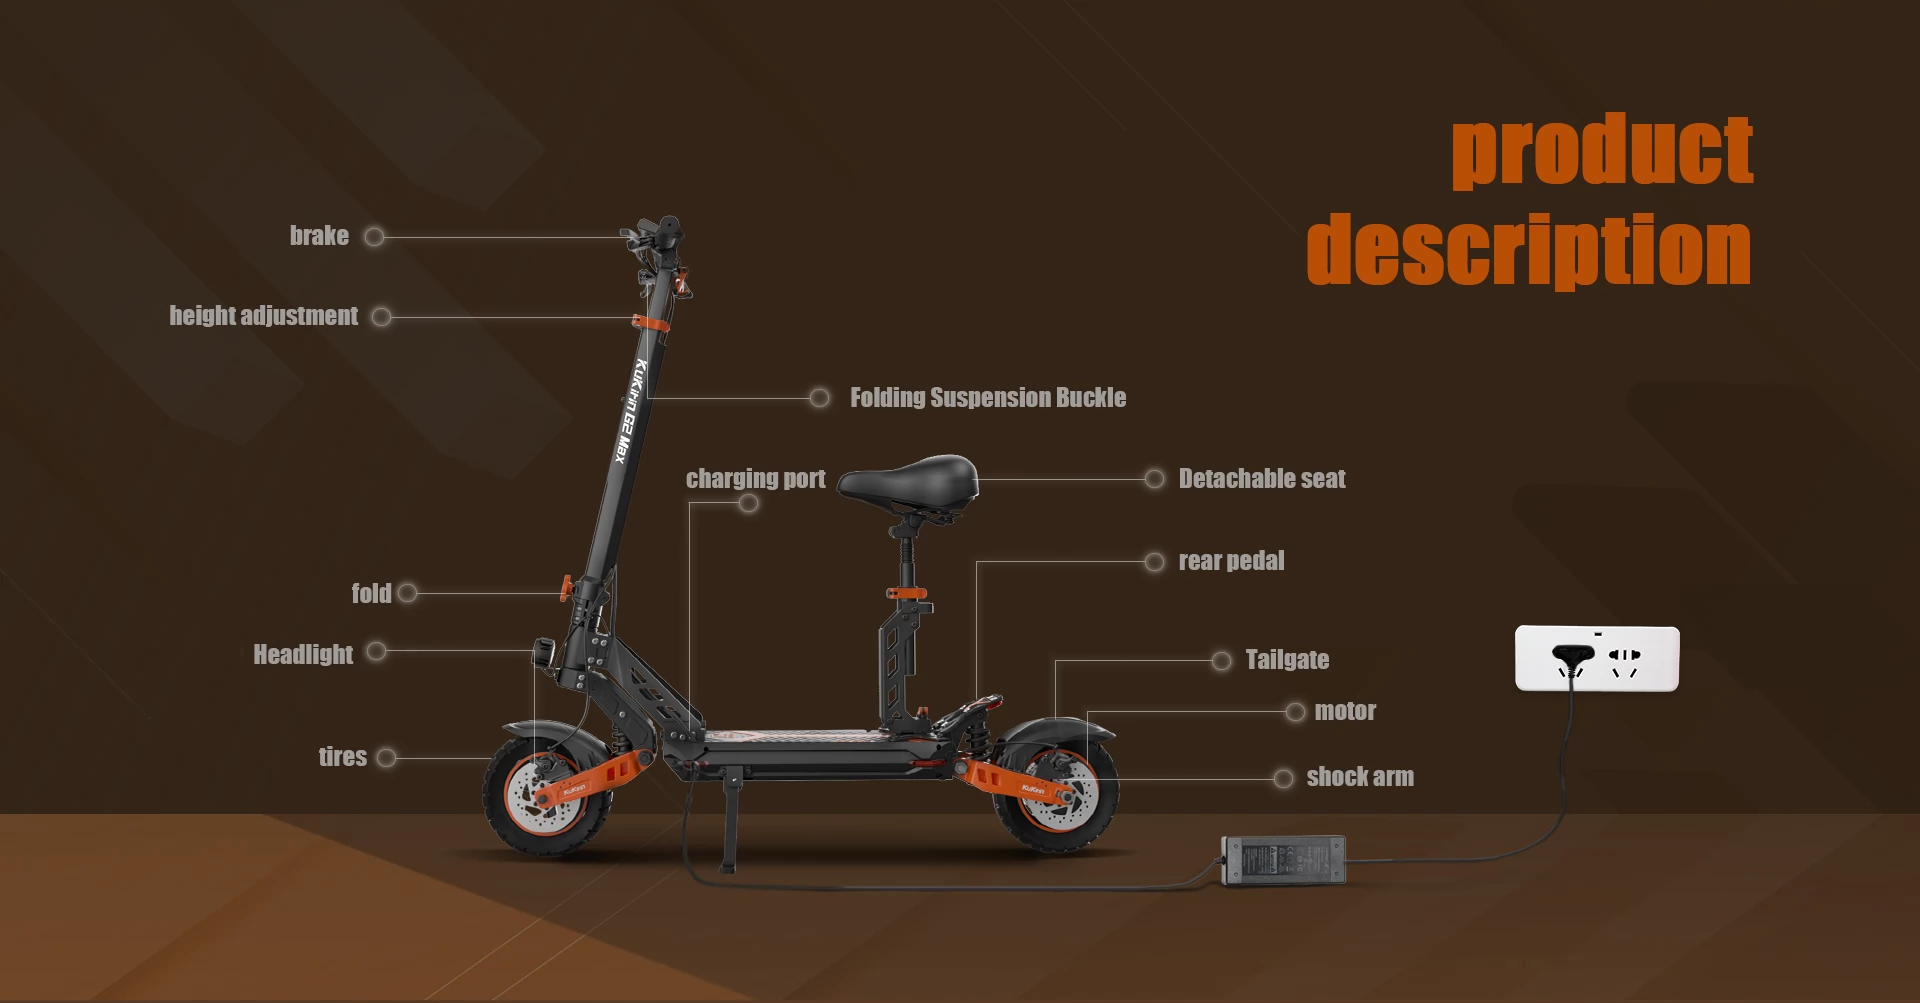 KUKIRIN G2 MAX 10*2.75 Inch Tires Foldable Off-road Electric Scooter - 1000W Brushless Motor & 48V 20Ah Battery